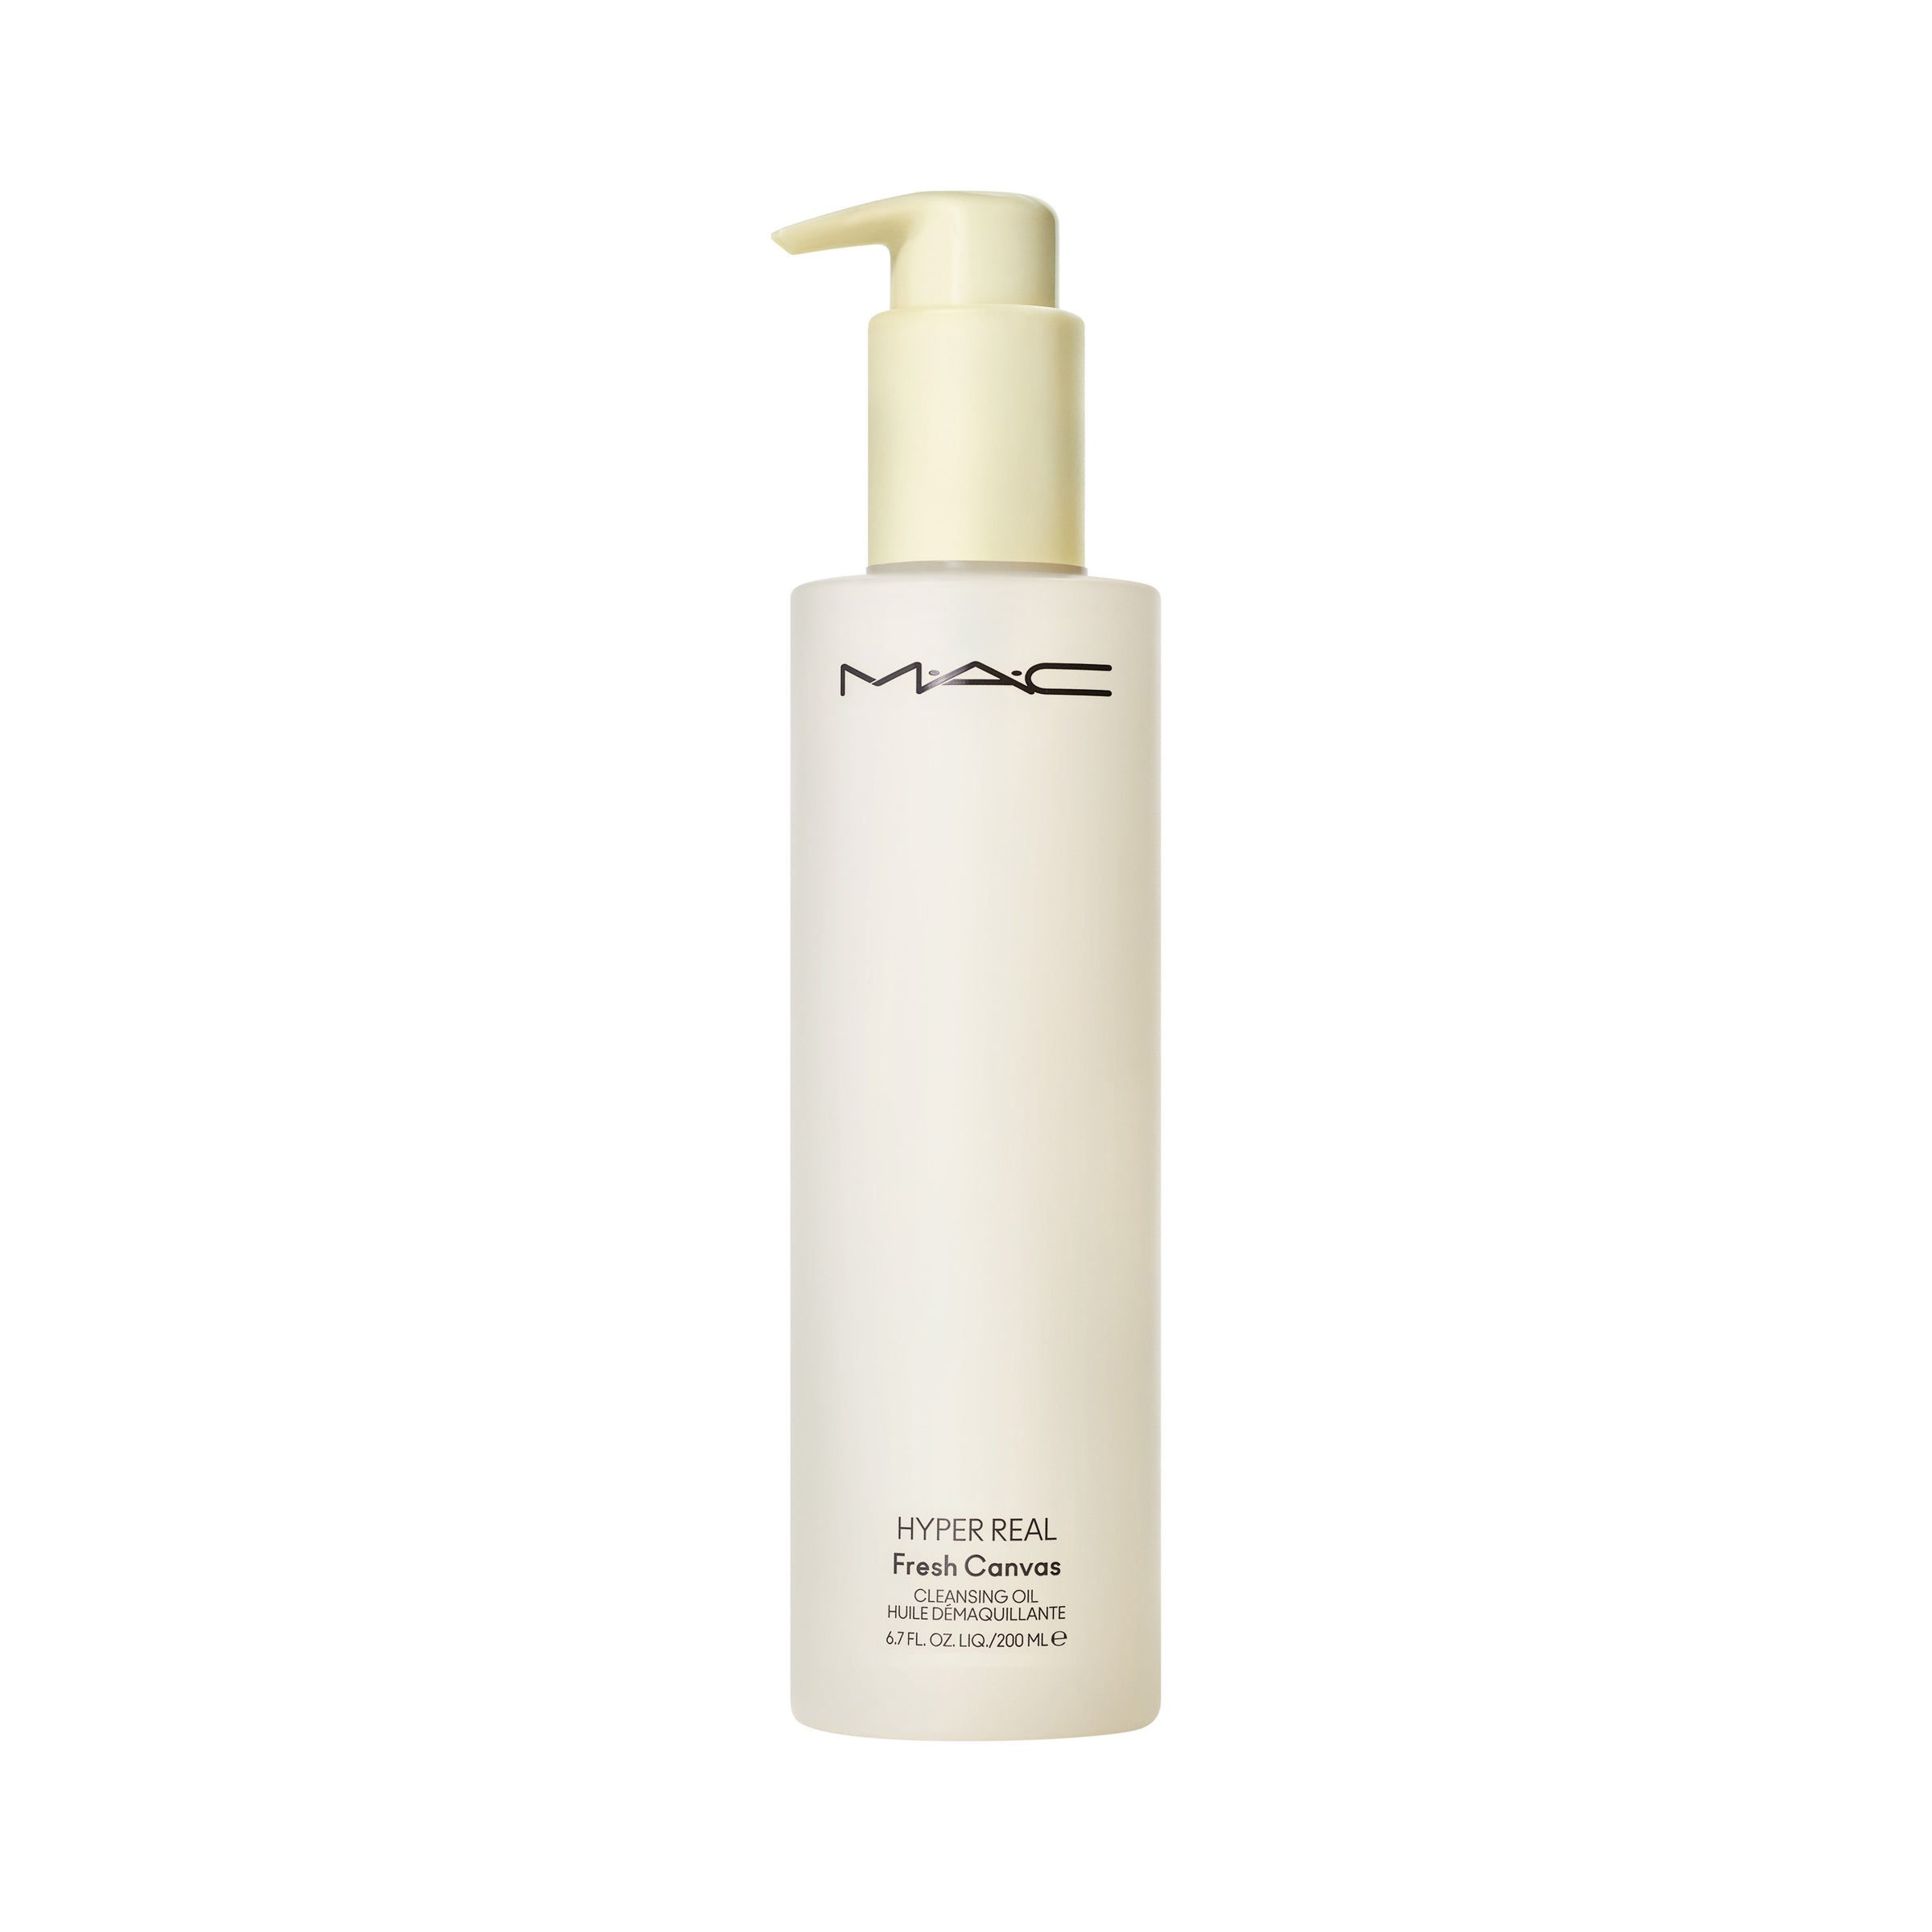 Shop The Latest Collection Of MAC Hyperreal Fresh Canvas Cleansing Oil In Lebanon